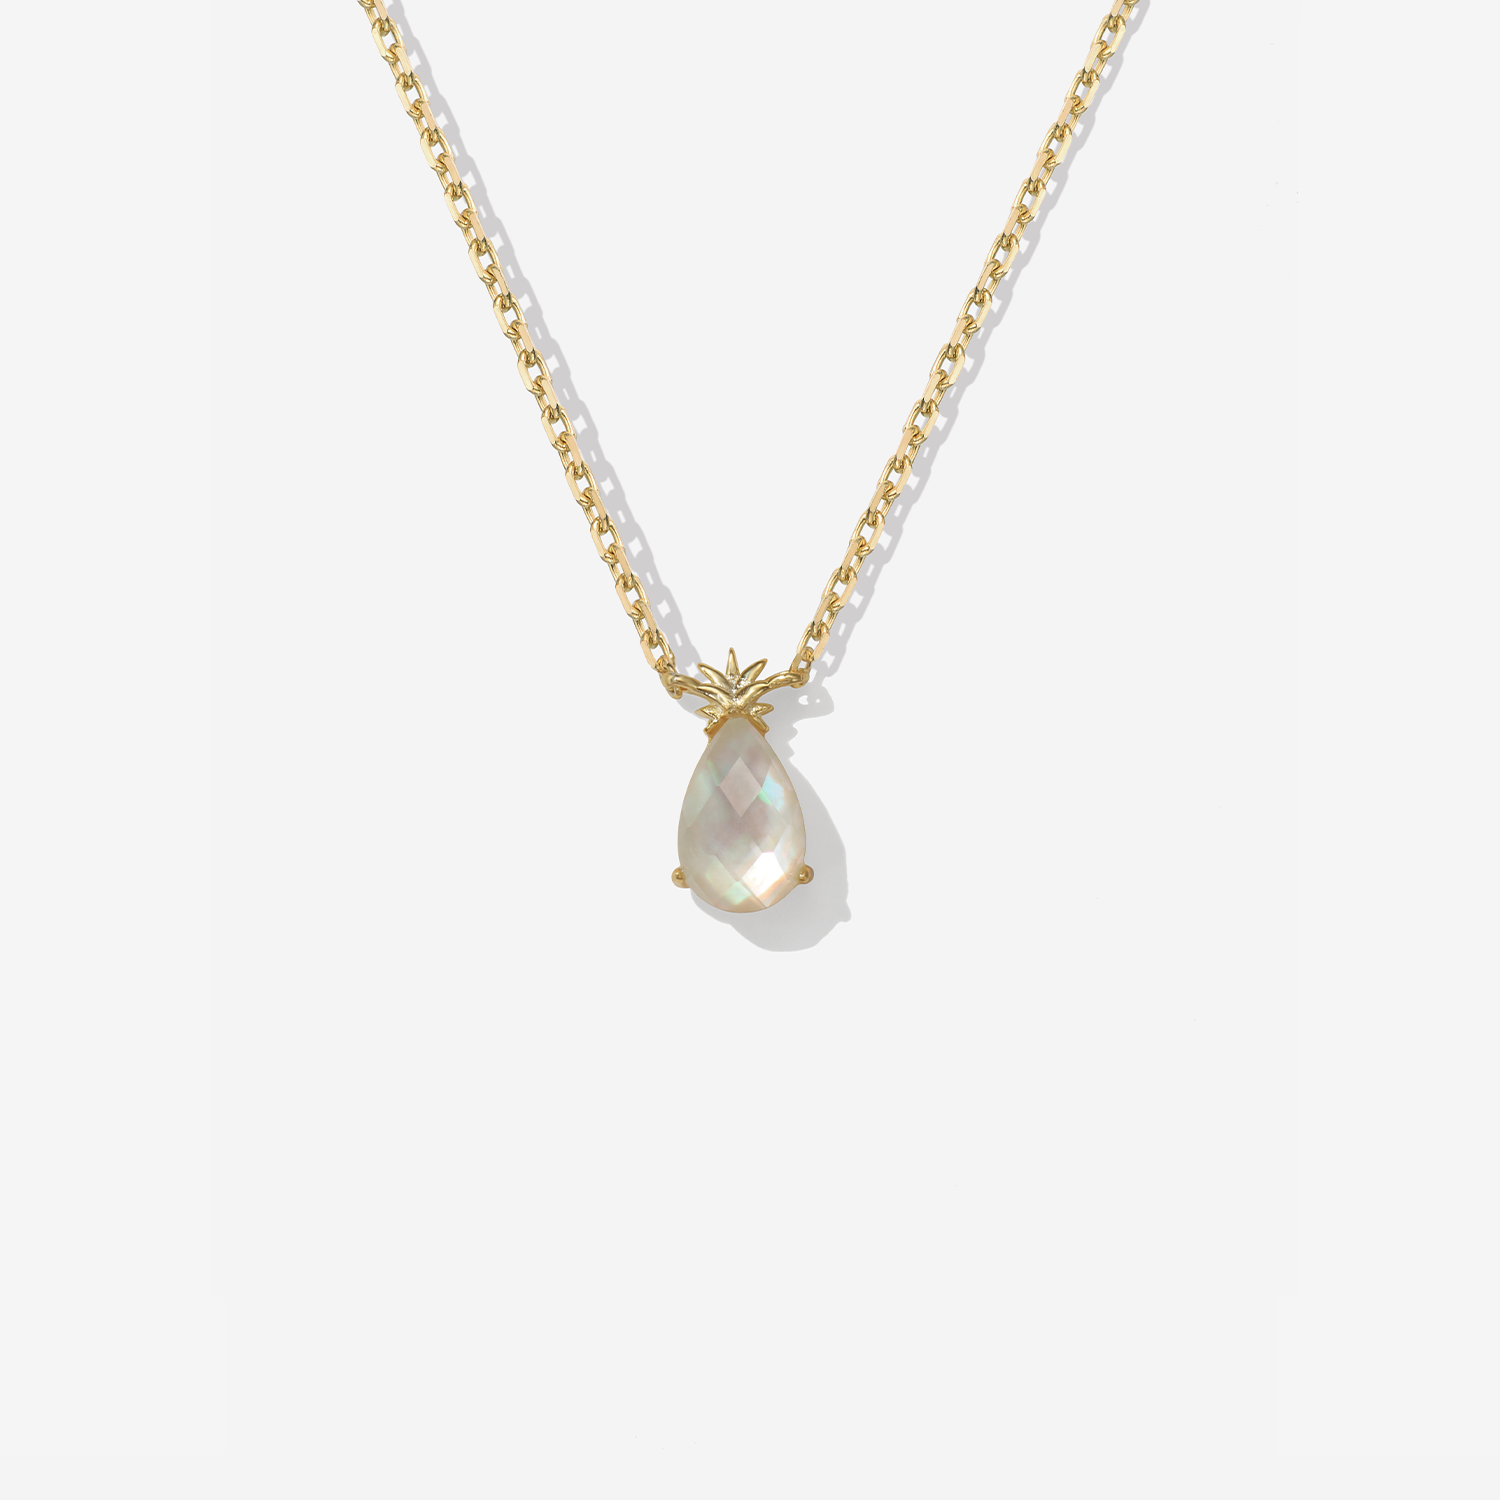 Moonstone Pineapple Necklace